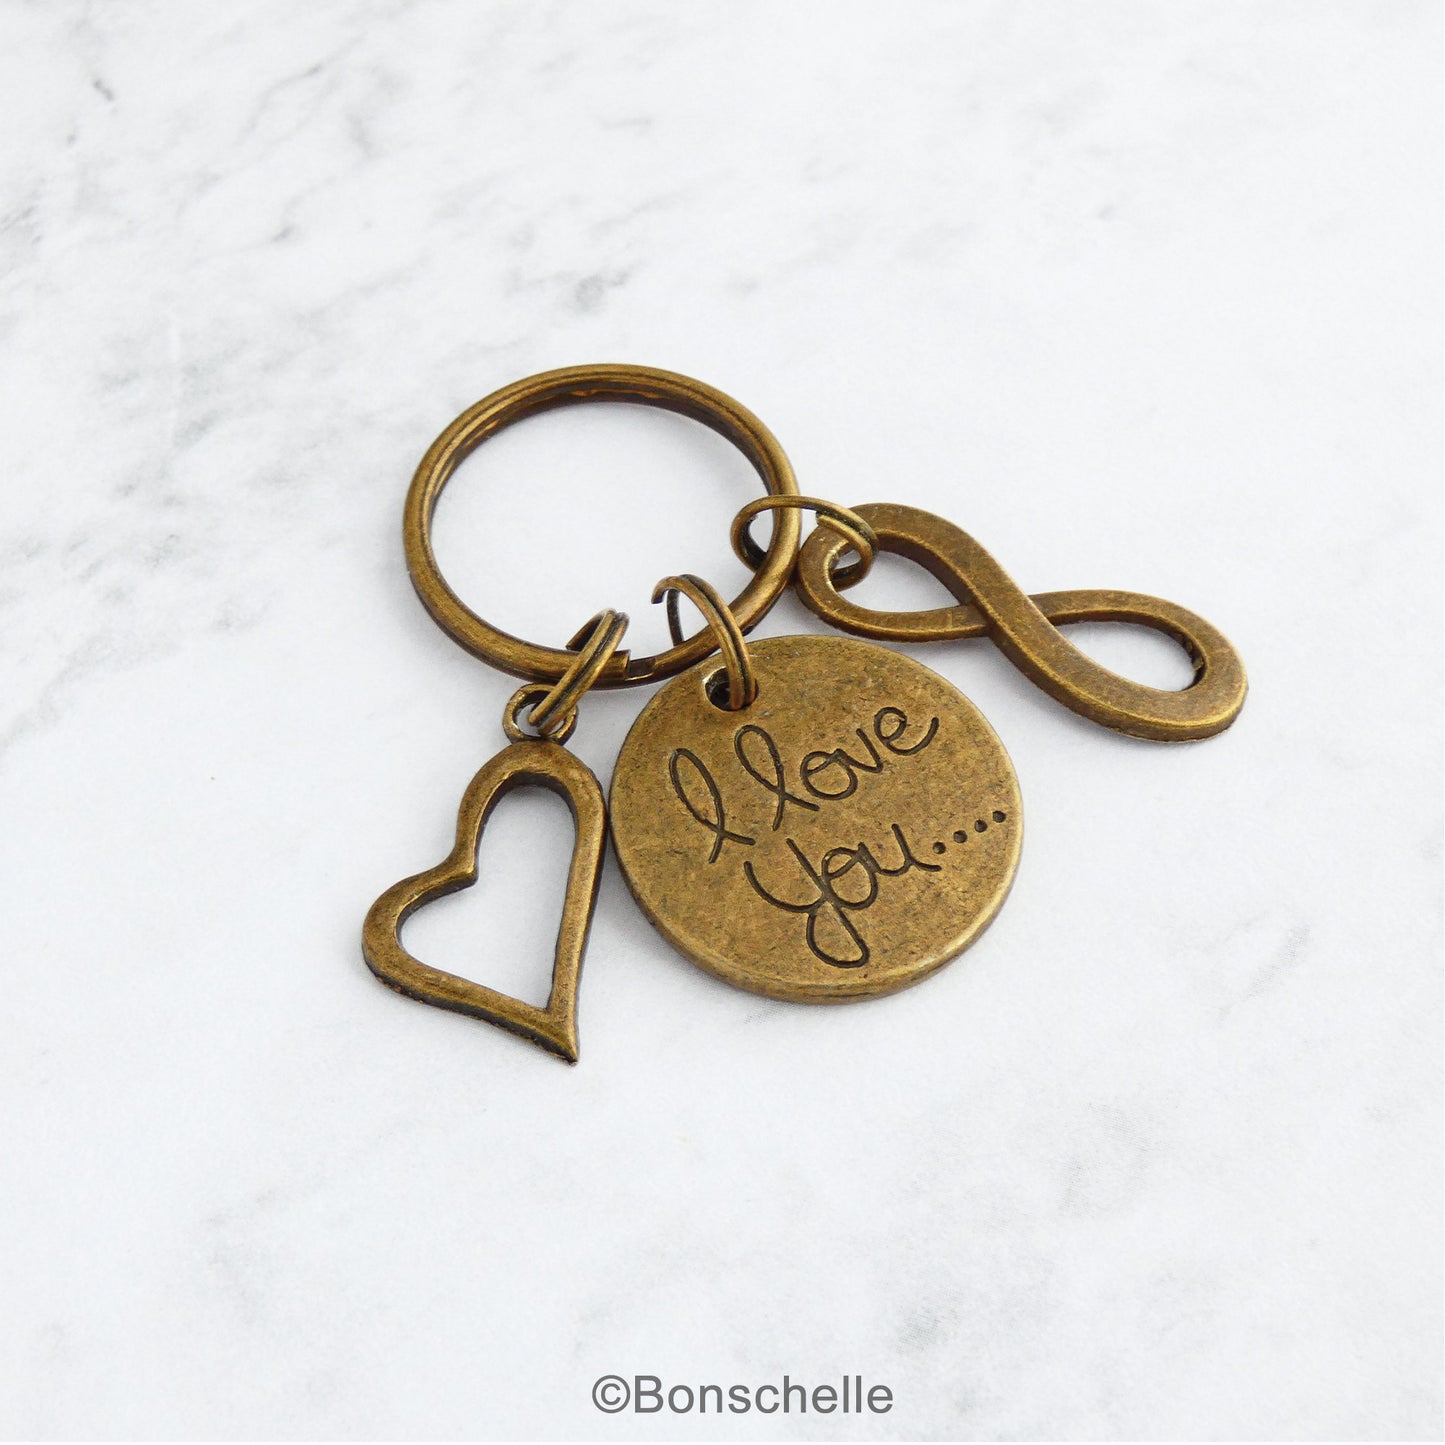 Bronze 8th or 19th anniversary keyring with an I love you charm, double heart charm and number 8 charm or infinity charm